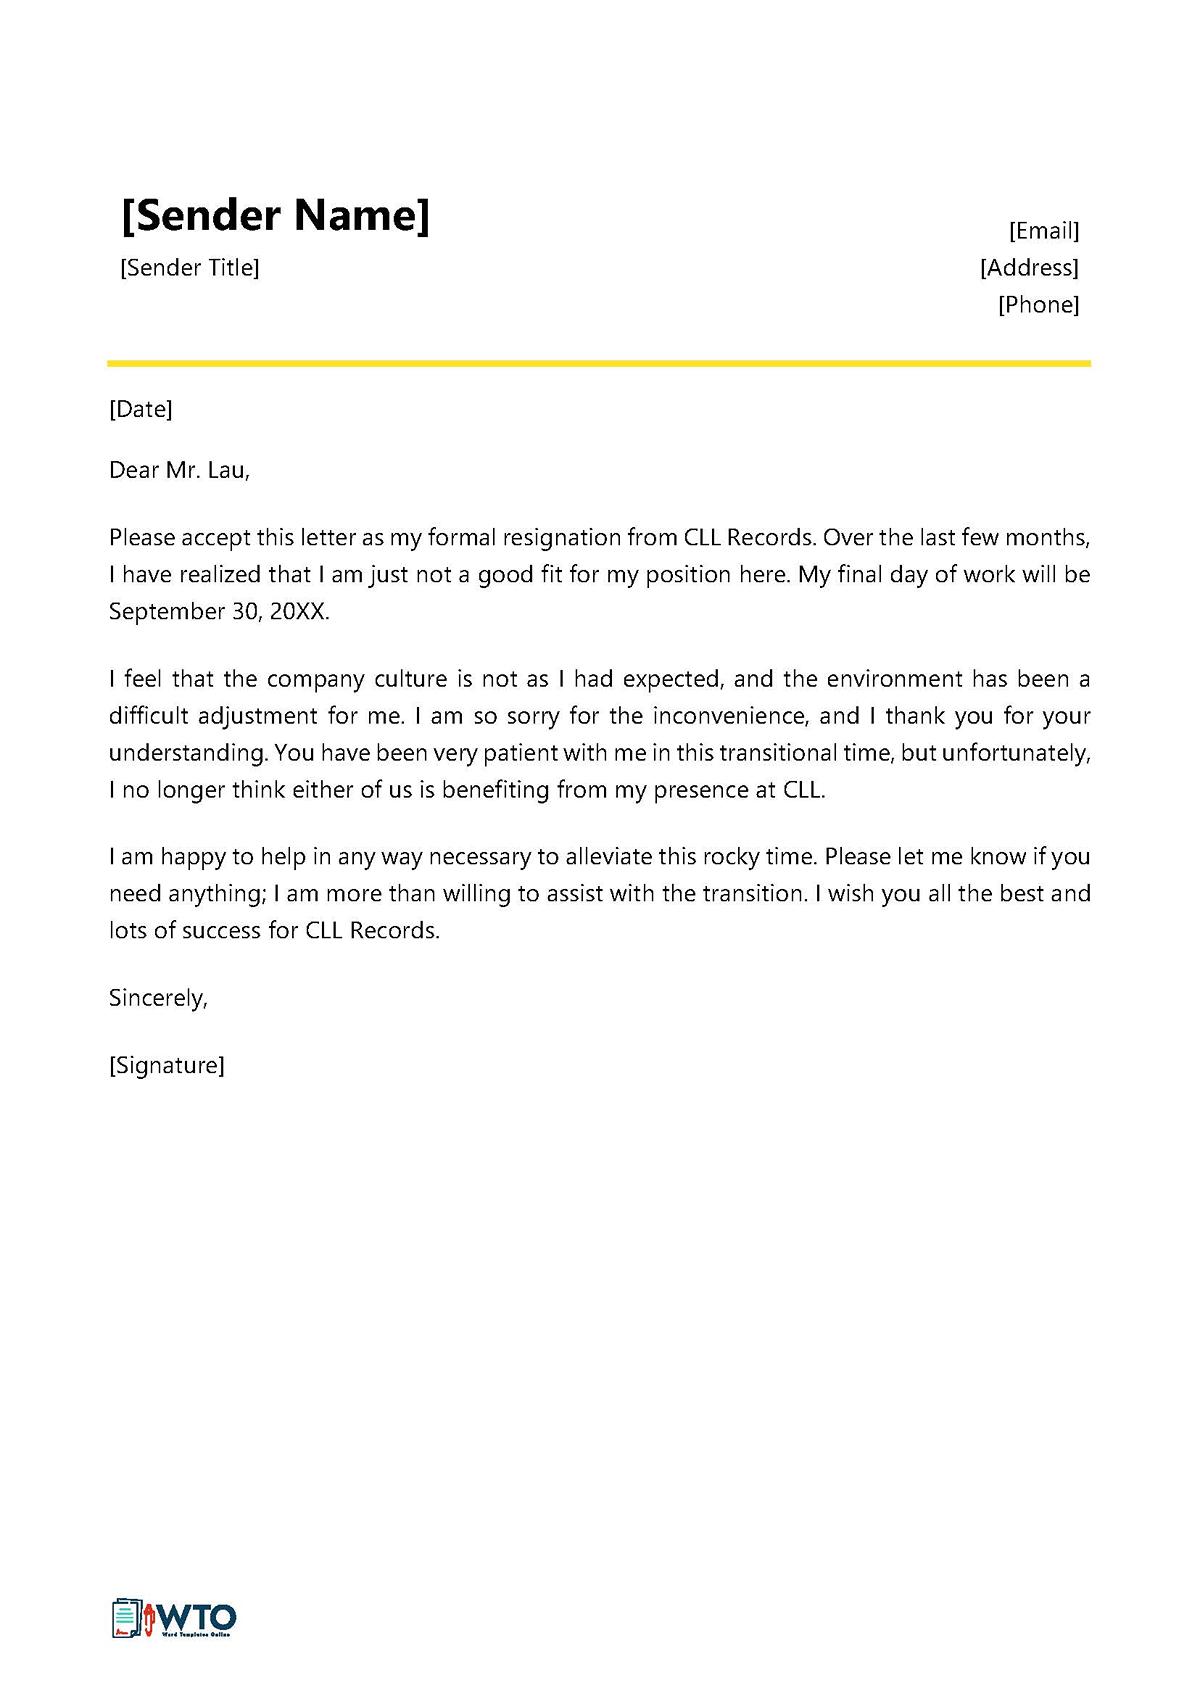 Resignation Letter Example - Sample Document (Job Not a Good Fit)